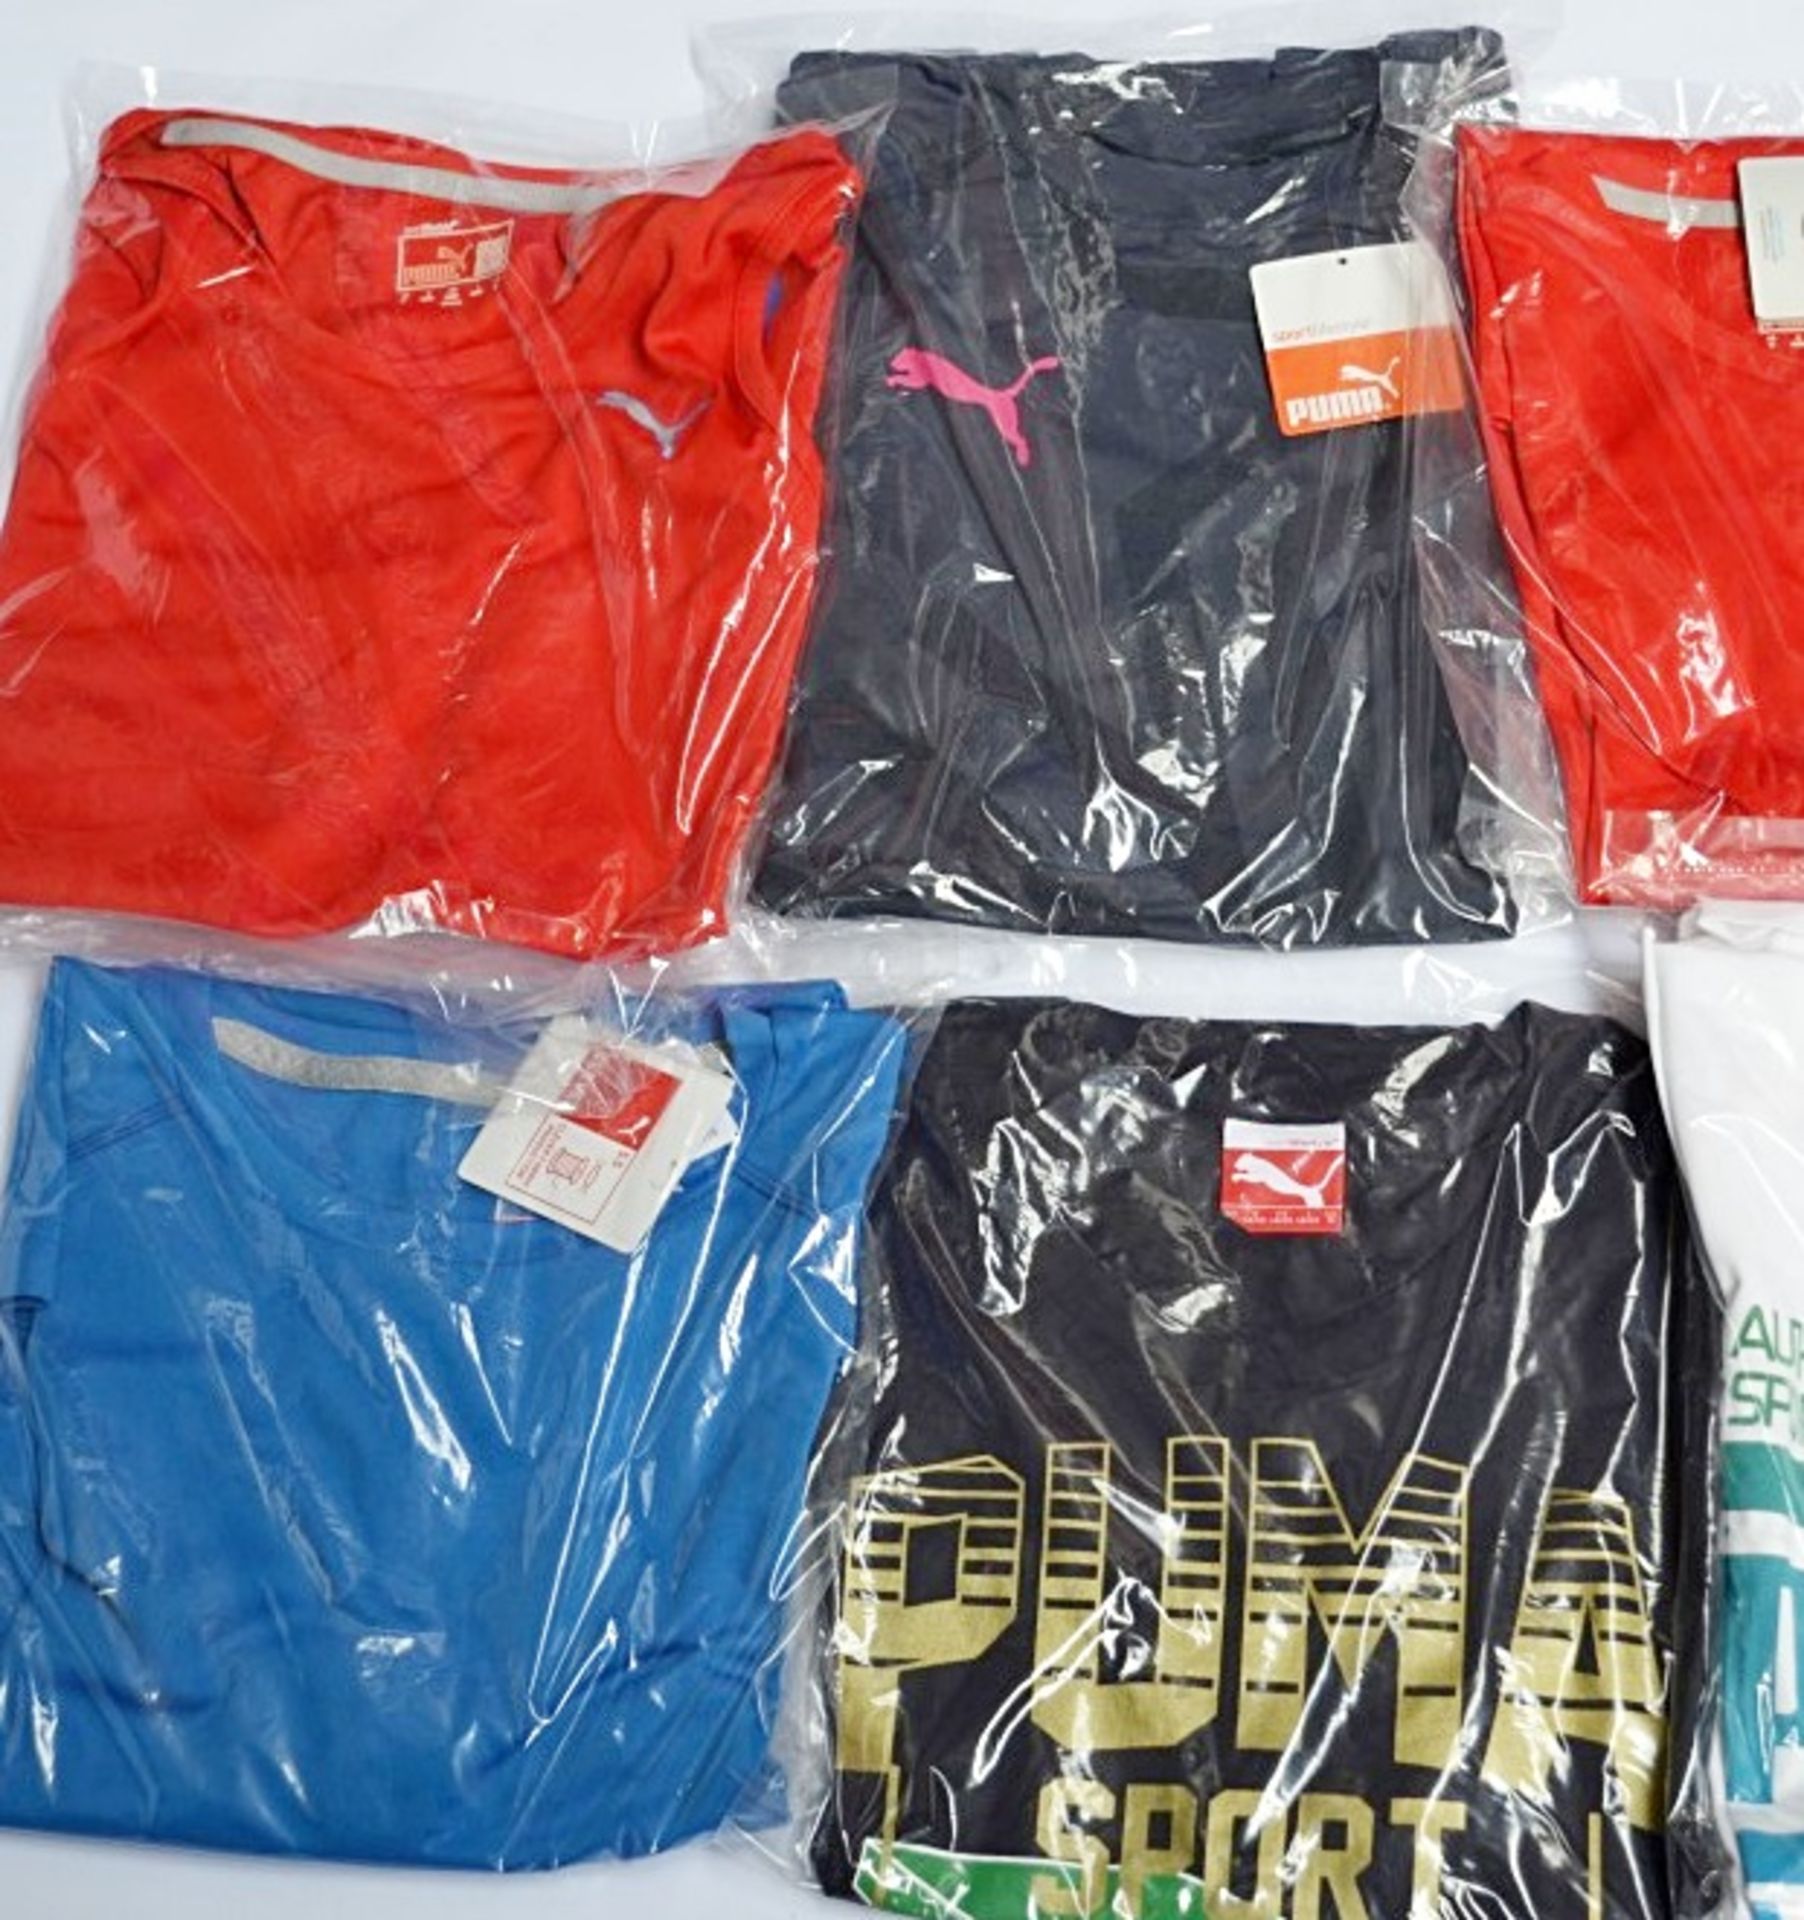 10 x Assorted PUMA Branded T-Shirts & Vests - Size: All Adult Medium - New With Tags - CL155 - - Image 2 of 5